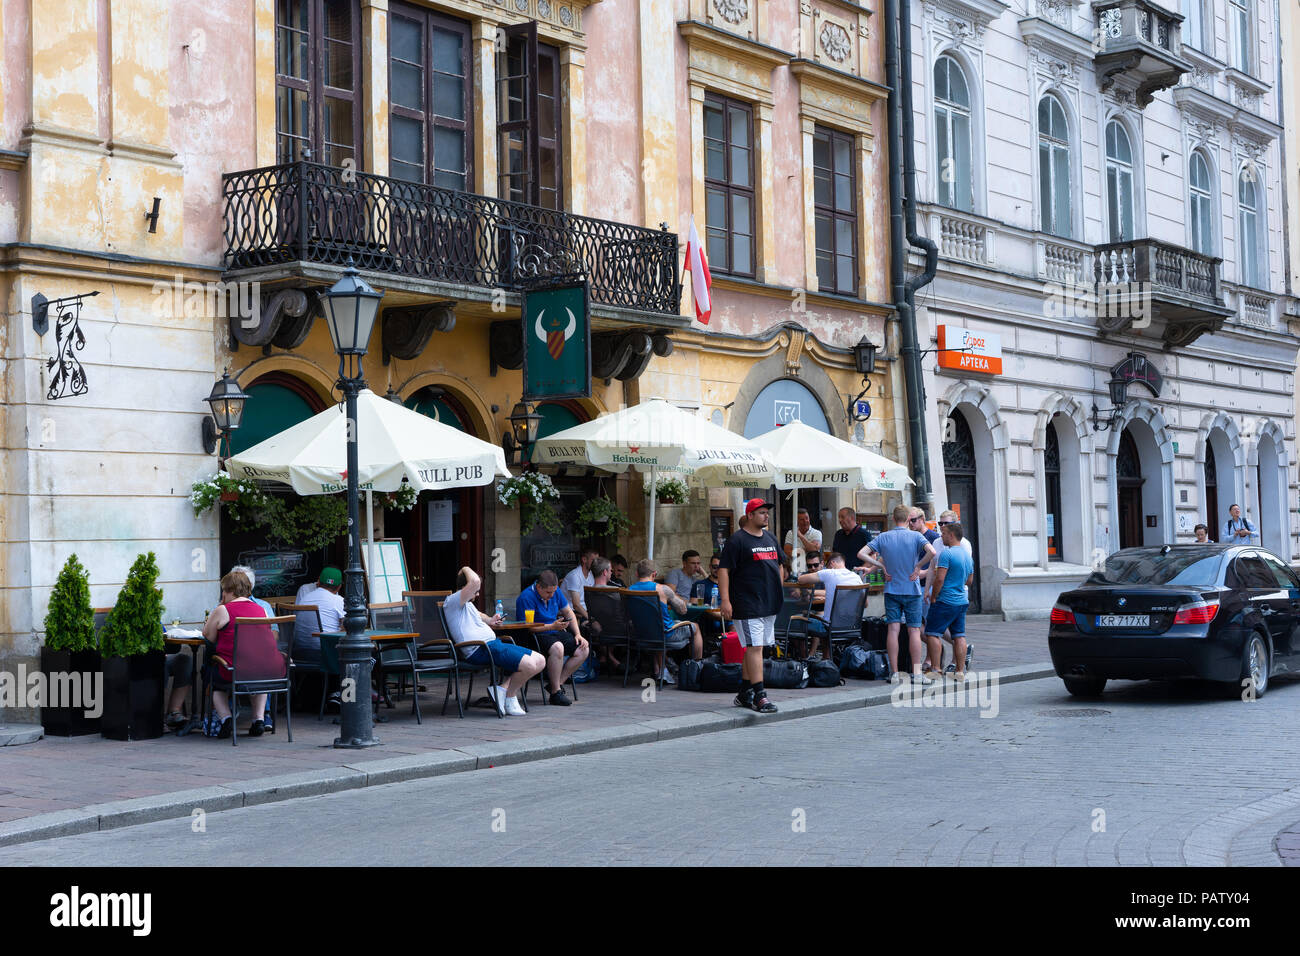 Group of young men enjoying a drink outside a pub in Krakow, Poland, Europe. Stock Photo